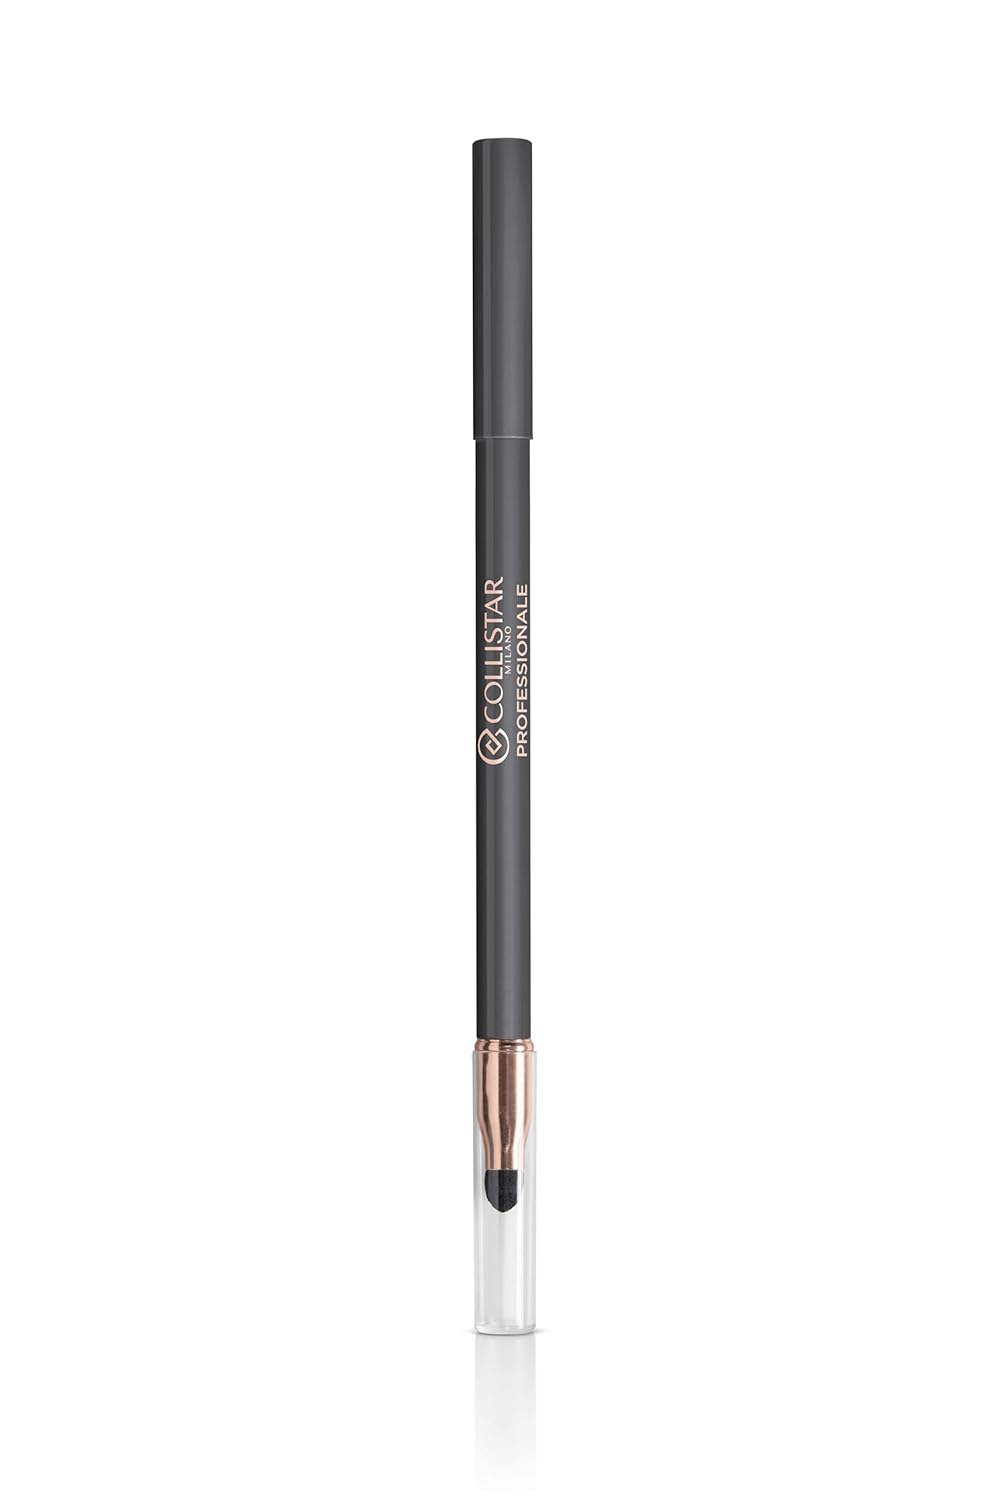 Collistar Professional Eye Pencil, Soft Texture, Easy to Fade, Long Life, Waterproof, 24 Hours, with Applicator, No.3 Steel, 1.2ml